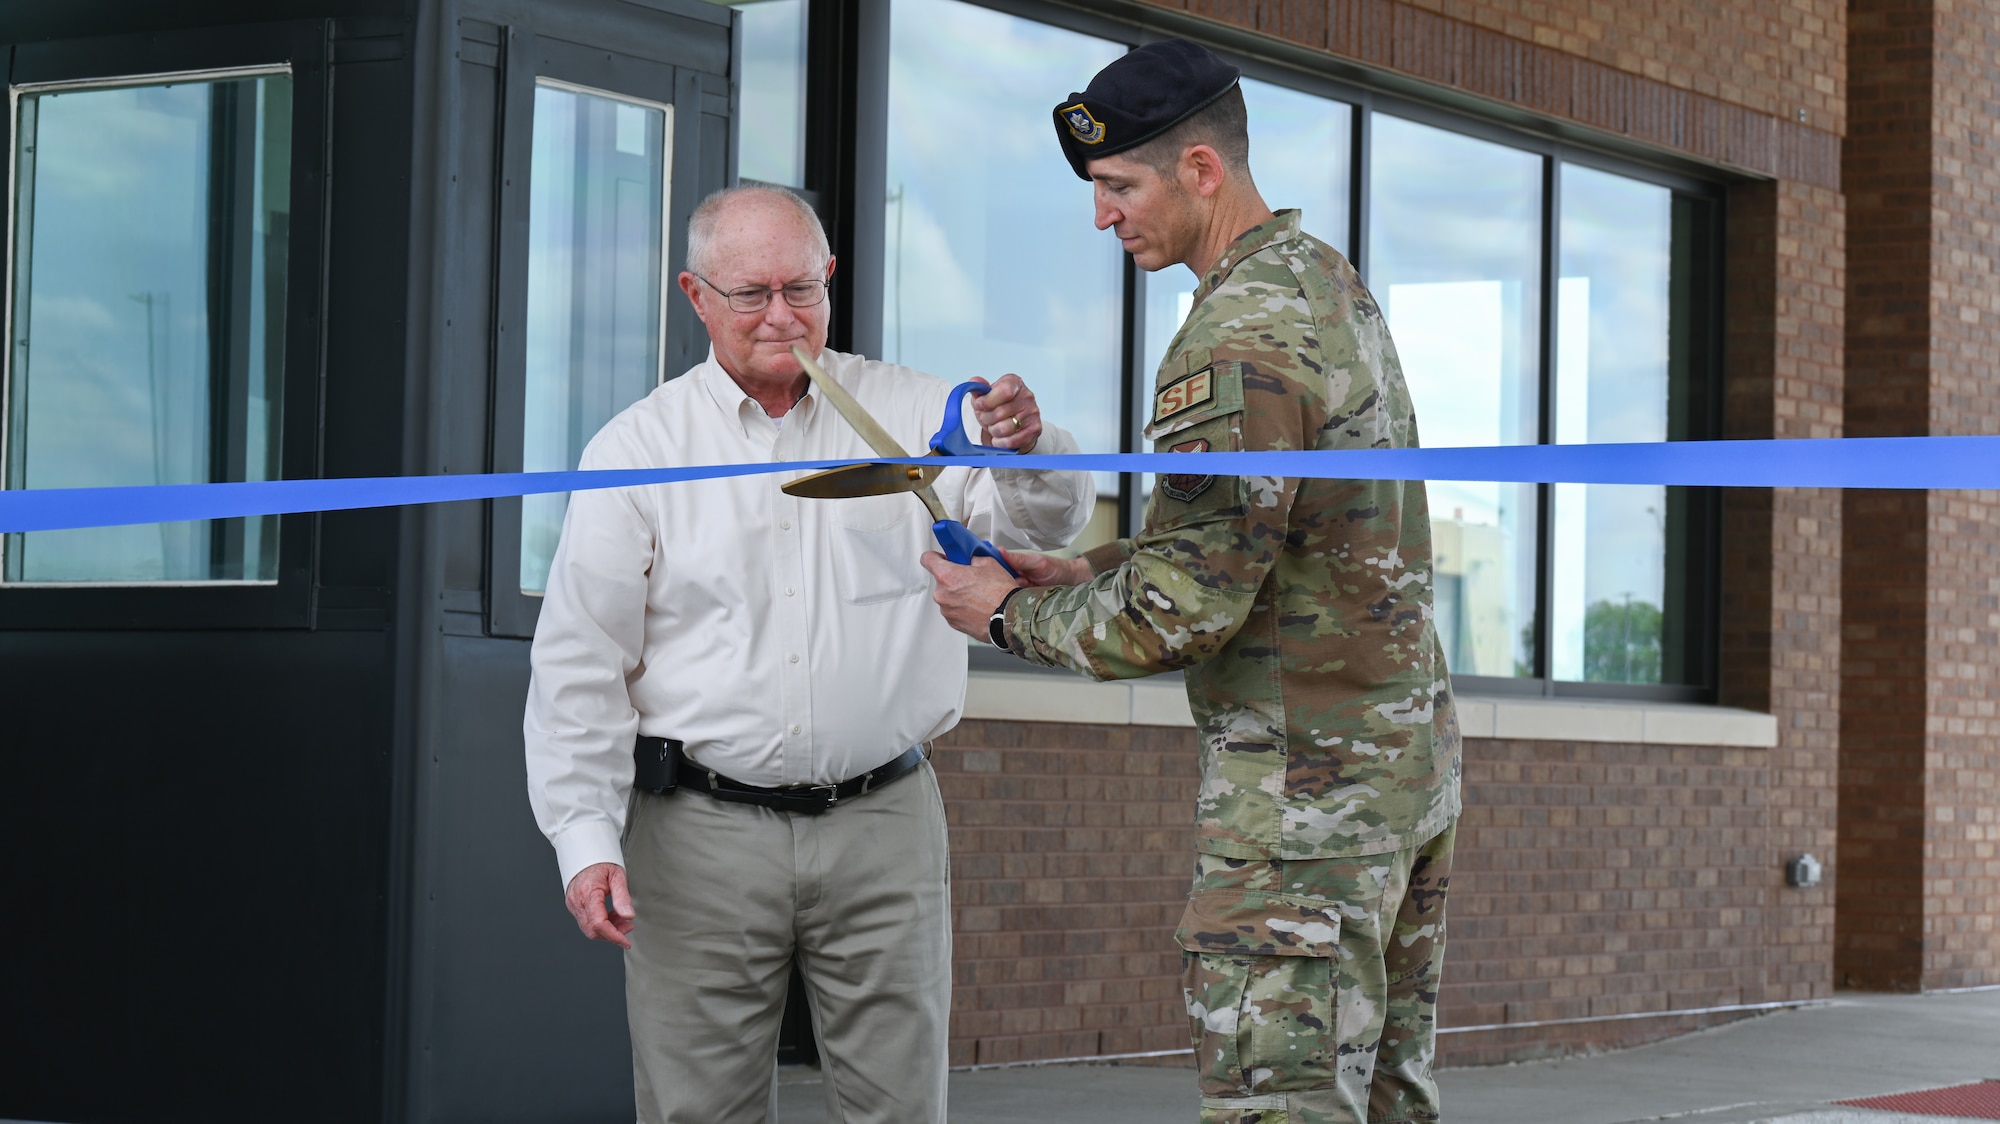 Mike Pence, co-president of Howard W. Pence, Inc. and U.S. Air Force Lt. Col. Stephen Addington, 509th Security Forces Squadron, commander cut the ribbon for LeMay Gate’s reopening at Whiteman AFB, Mo., April 5, 2023. Howard W. Pence, Inc. contributed to the work improving LeMay Gate’s infrastructure. (U.S. Air Force Airman 1st Class Hailey Farrell)